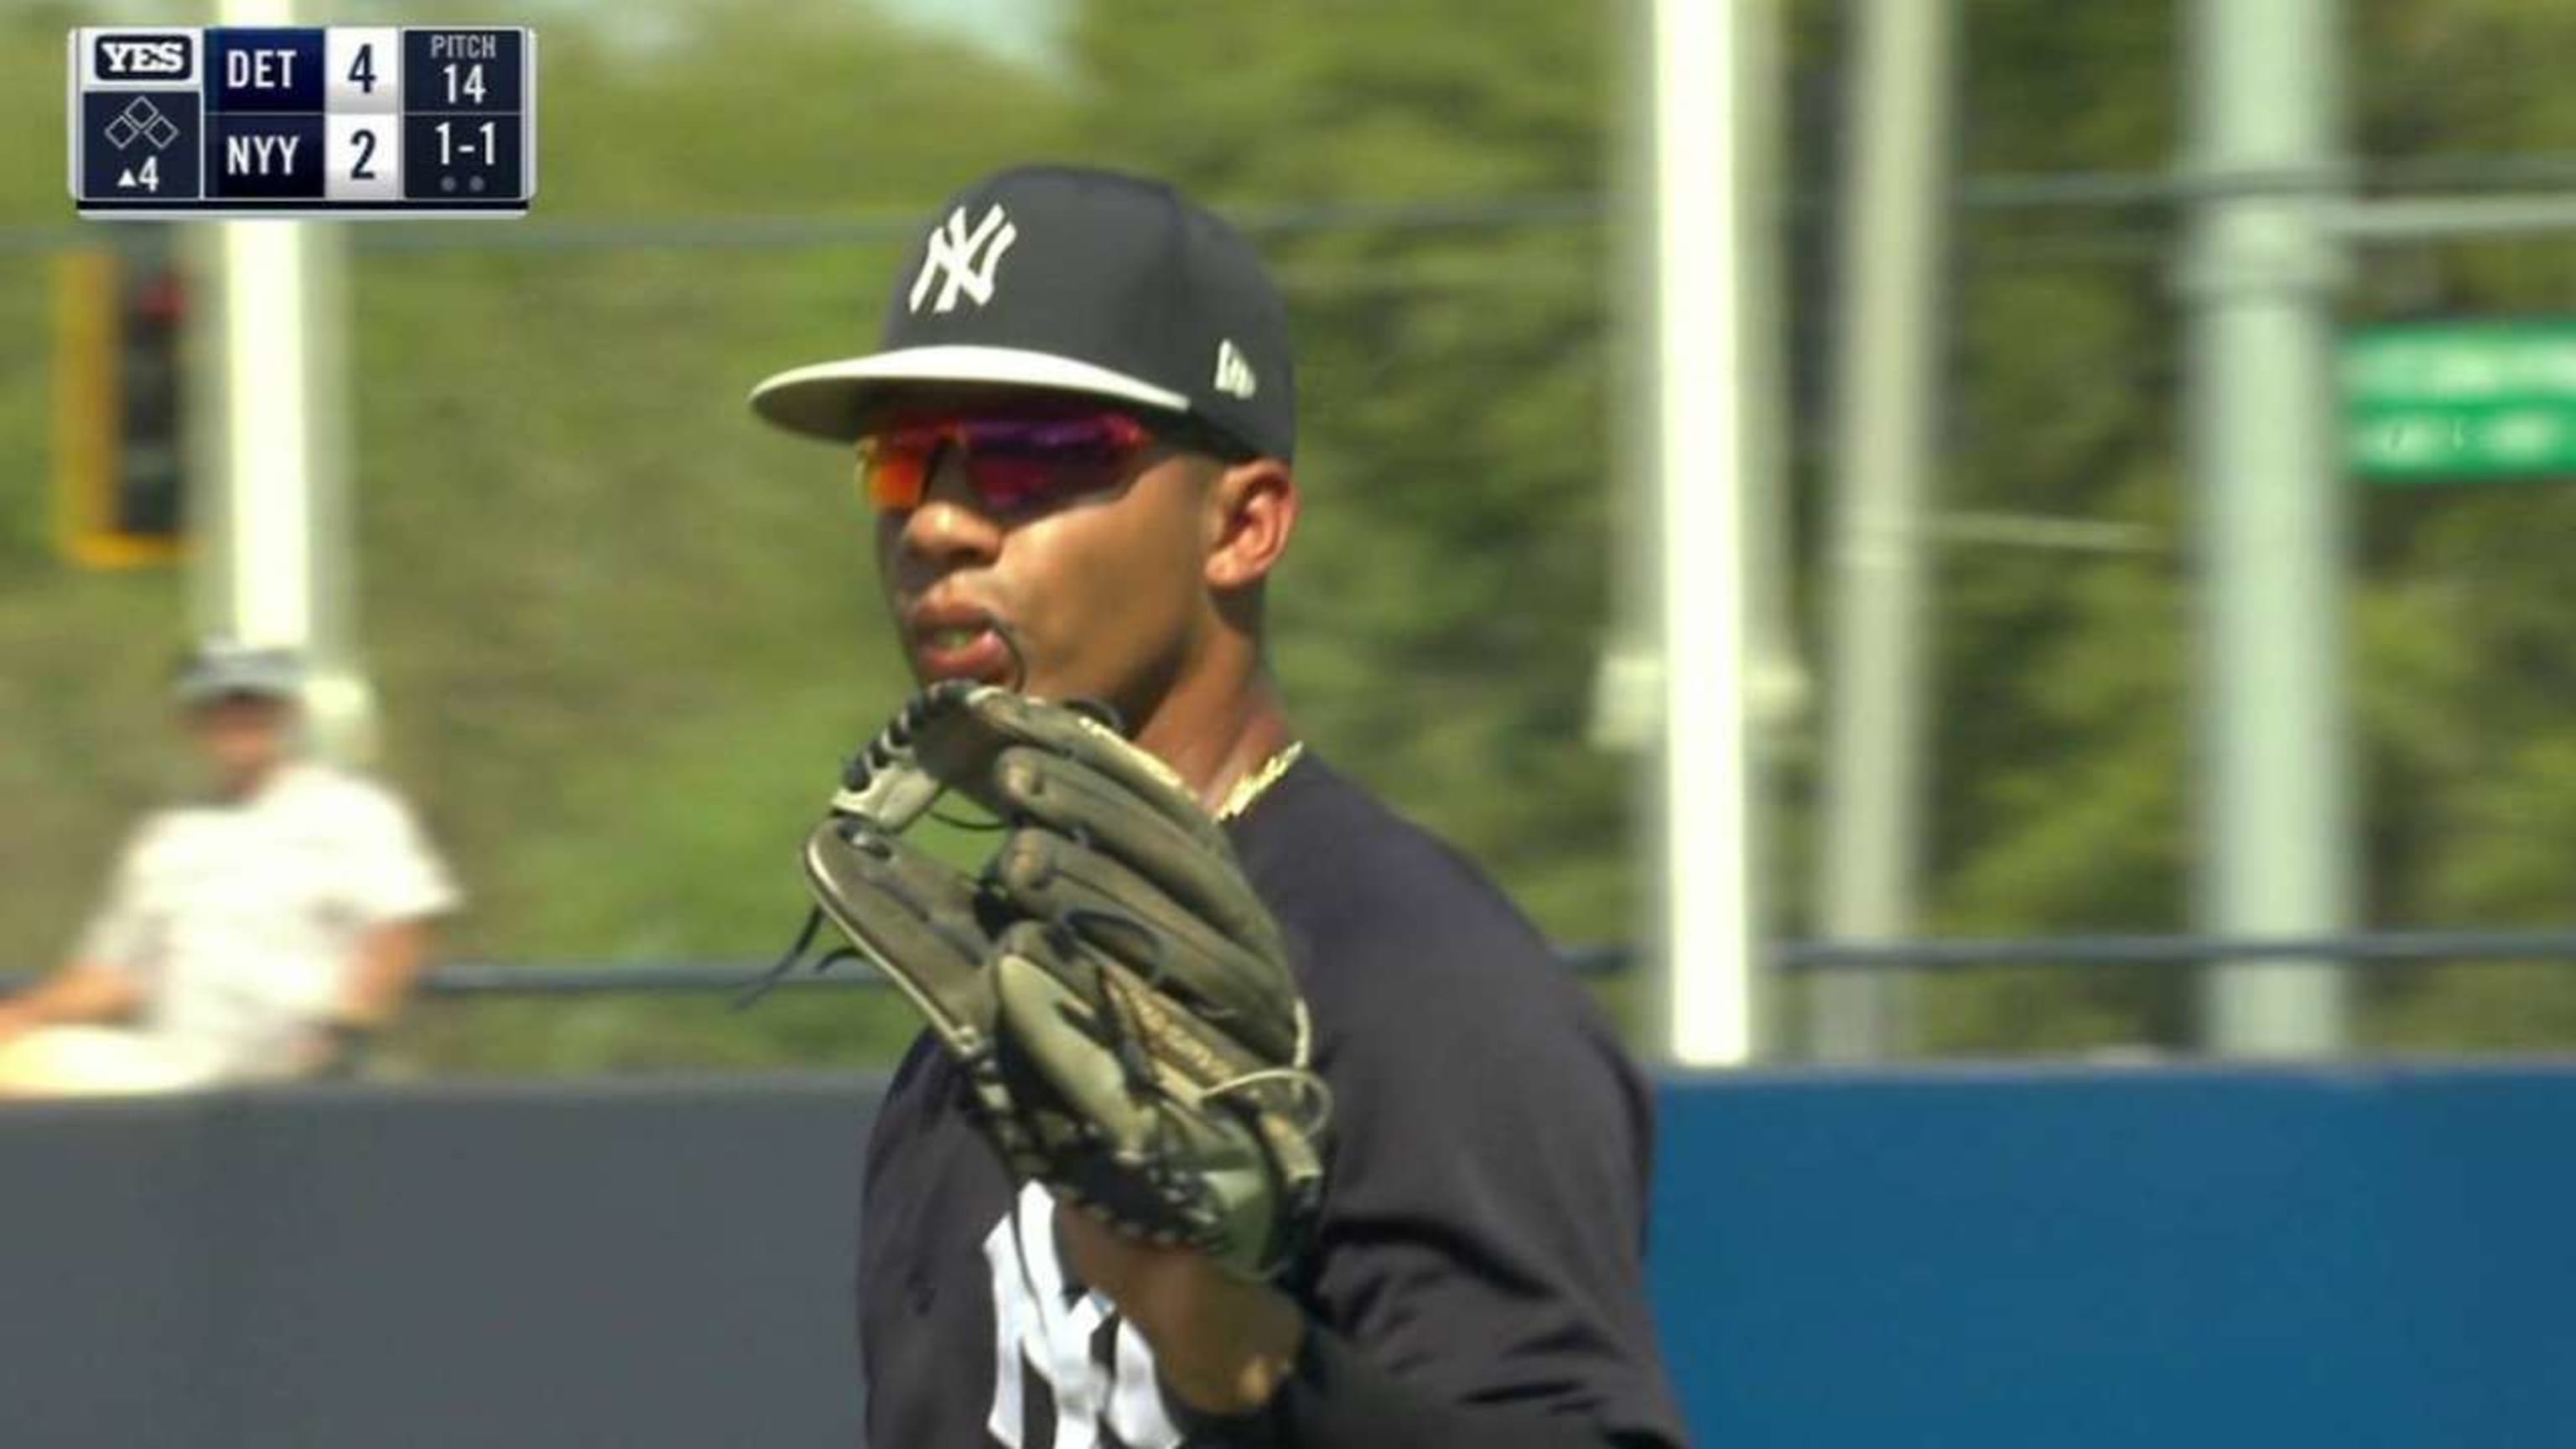 Yankees set to call up Gleyber Torres from minor leagues